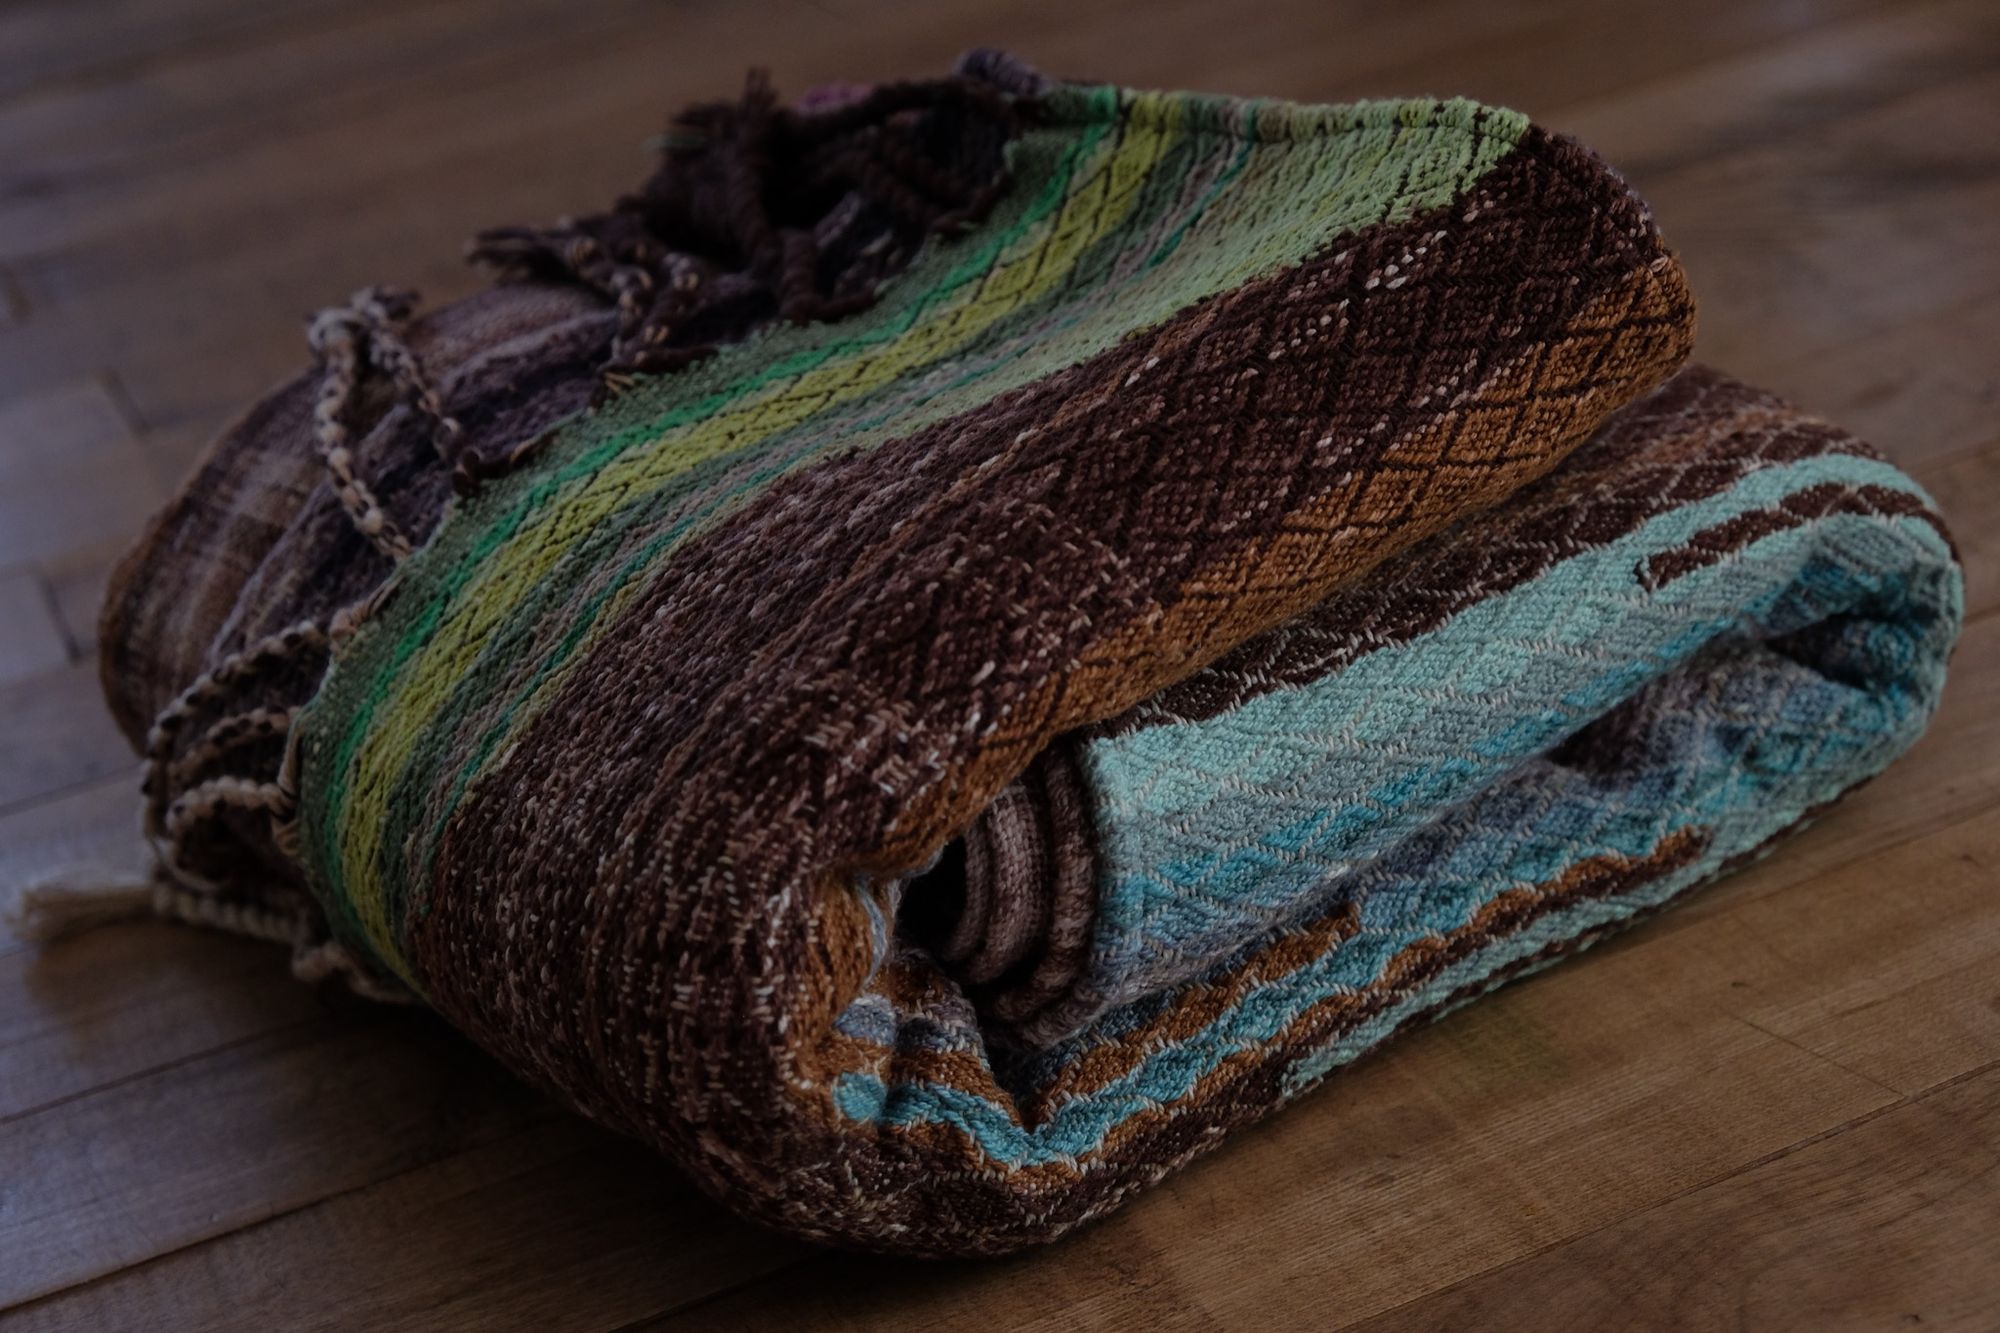 A handwoven, diamond pattern shawl in blues, grey, black, brown, pink and green laying on a wooden floor